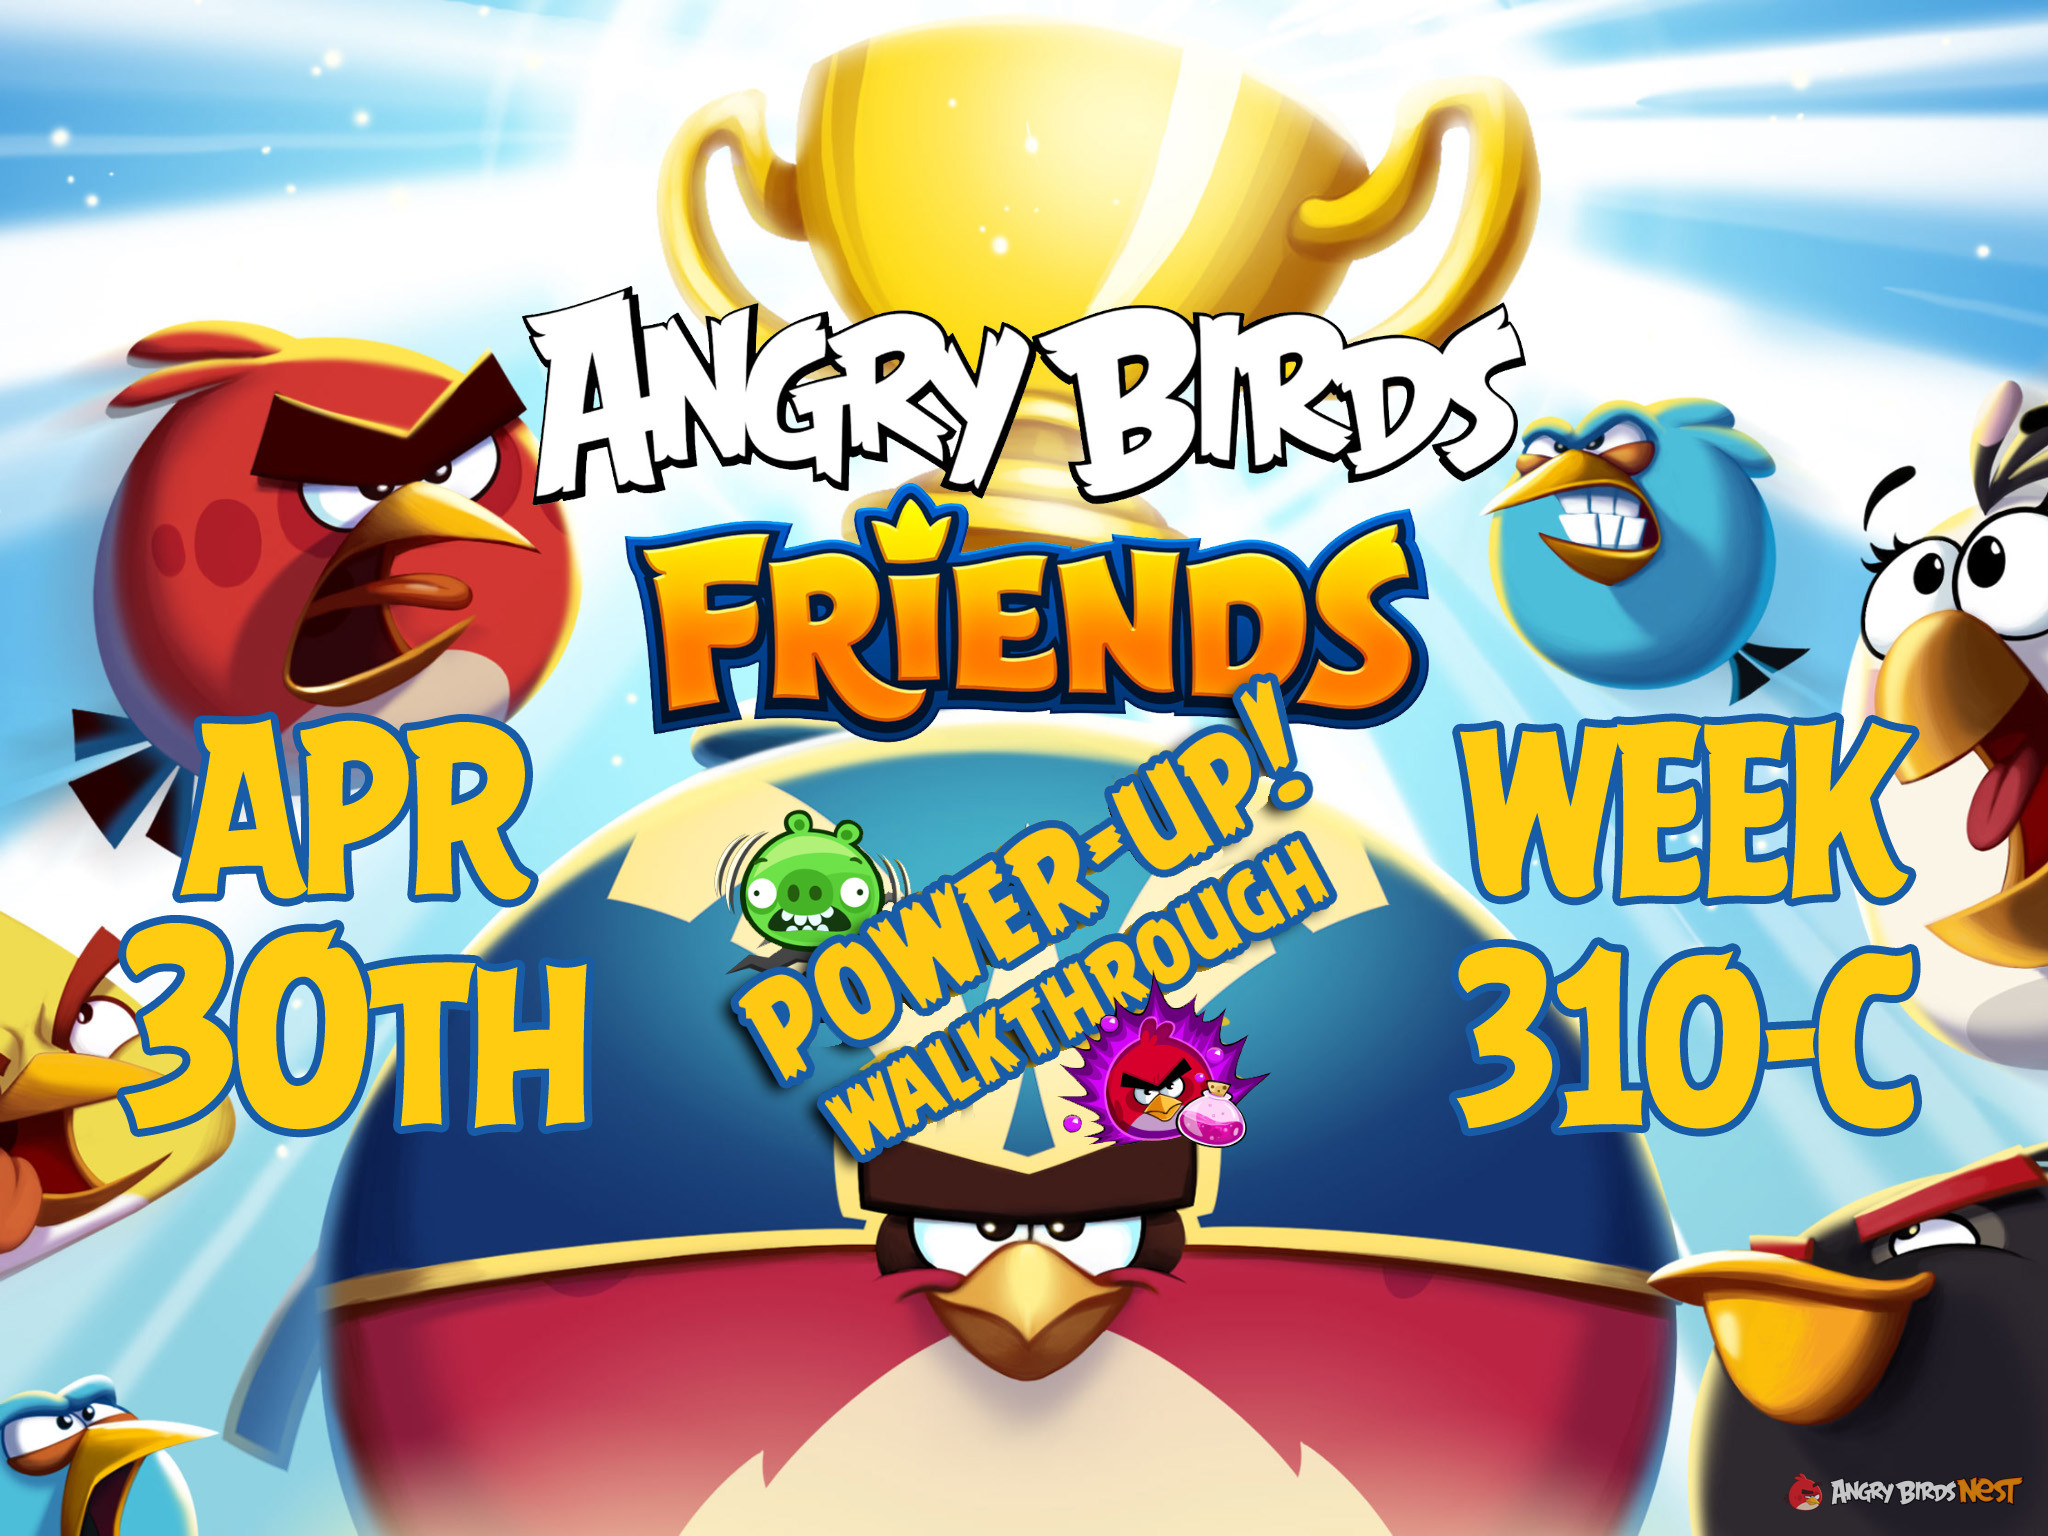 Angry Birds Friends Tournament Week 310-C Feature Image PU